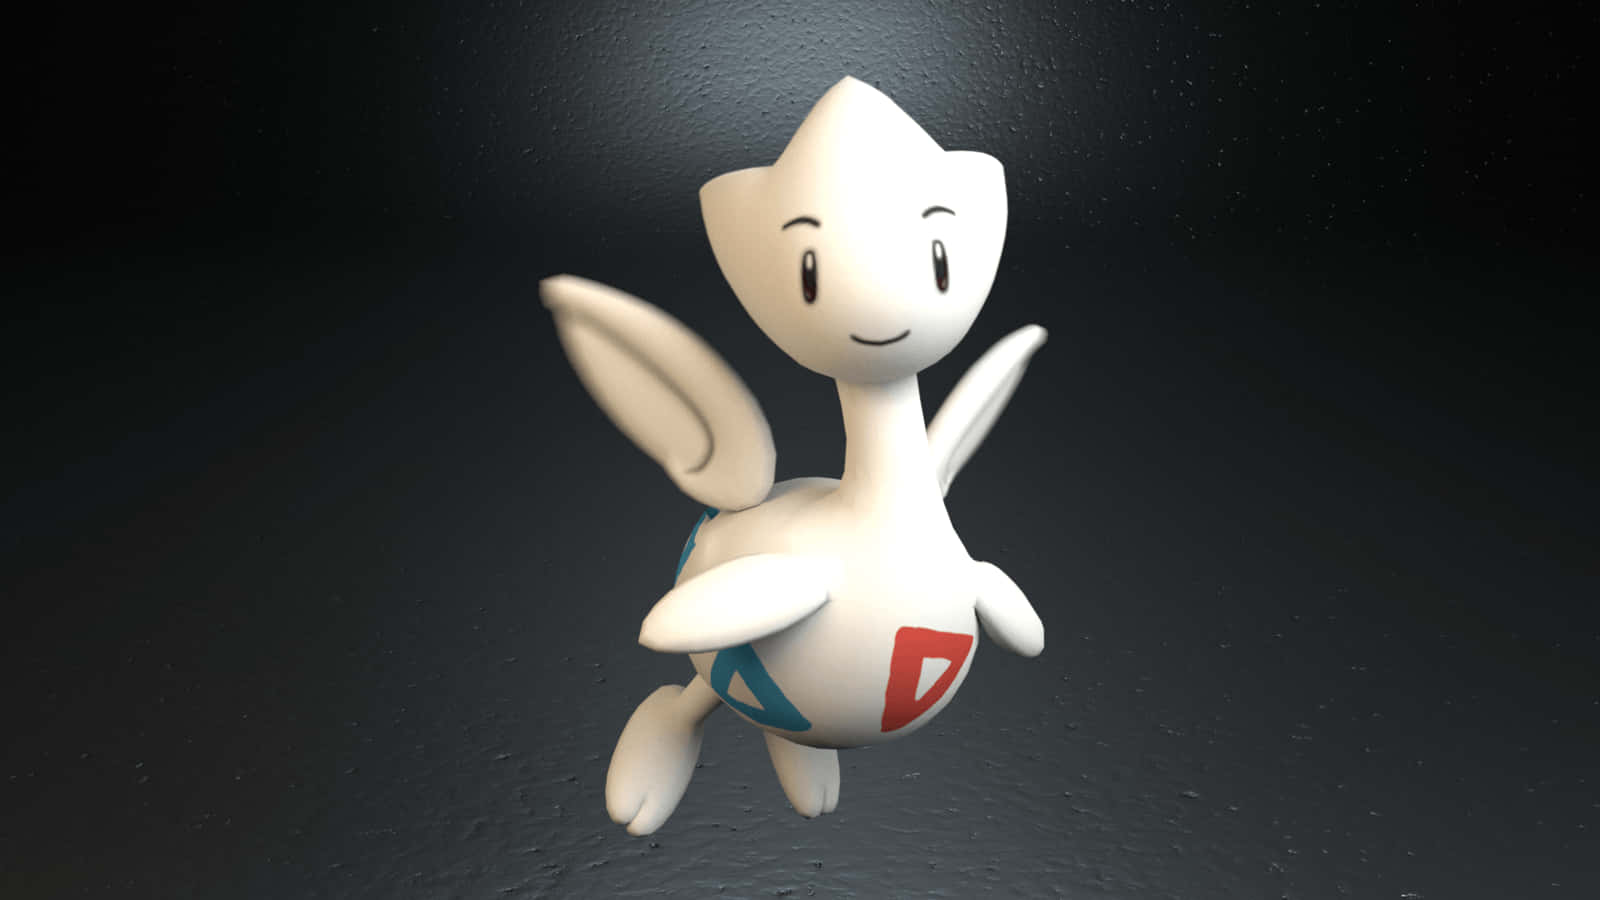 "Togetic soars high, bringing good luck to all" Wallpaper